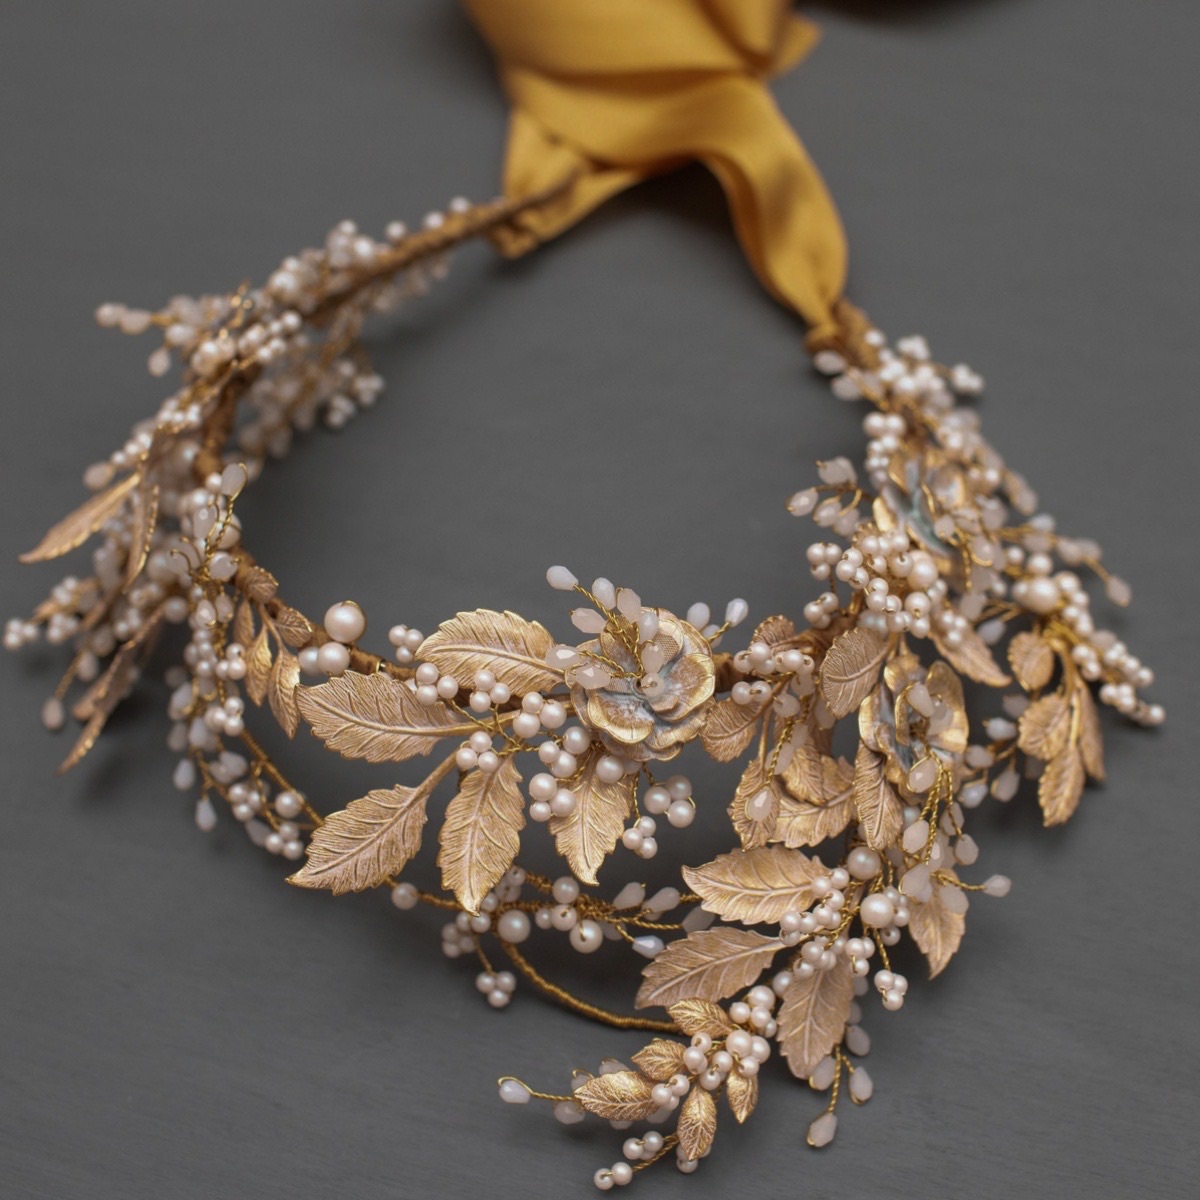 Statement bridal crown headdress made from glass pearls and pale gold leaves